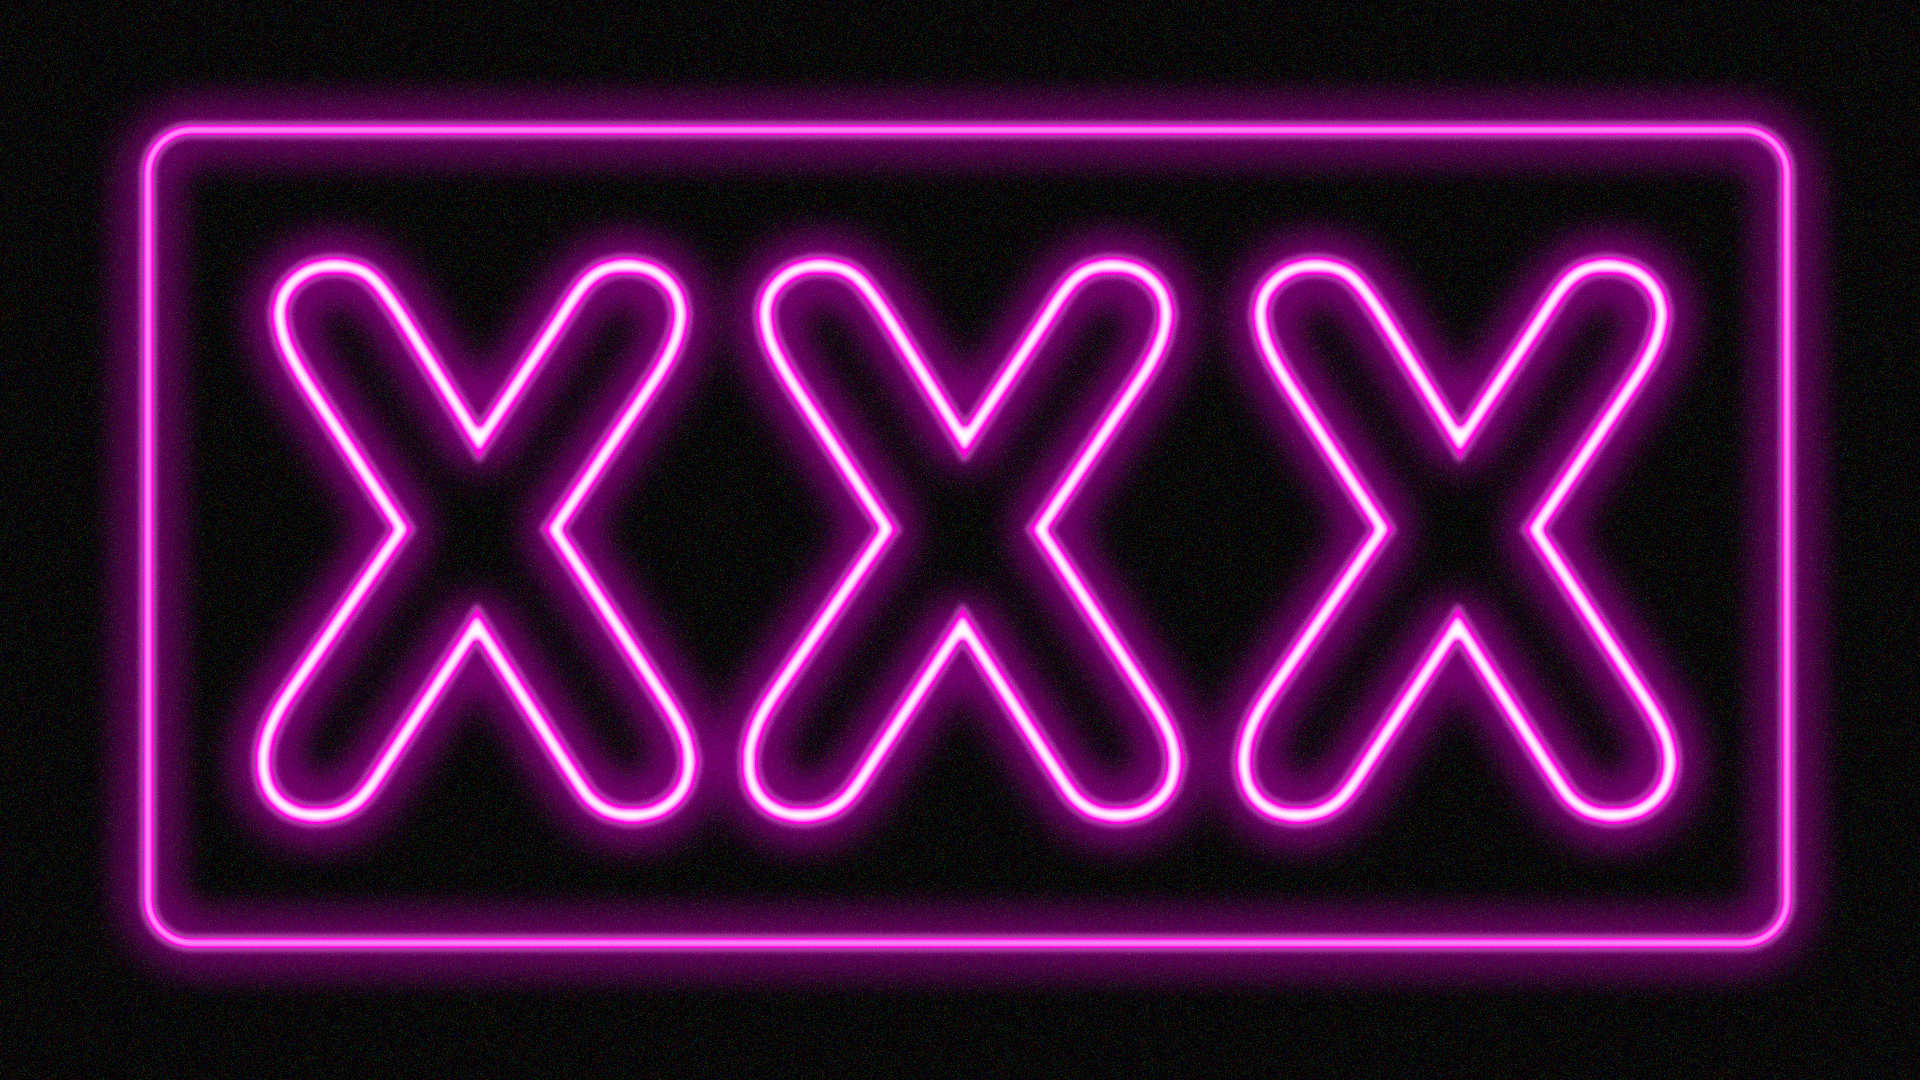 animation of an XXX neon sign being powered off